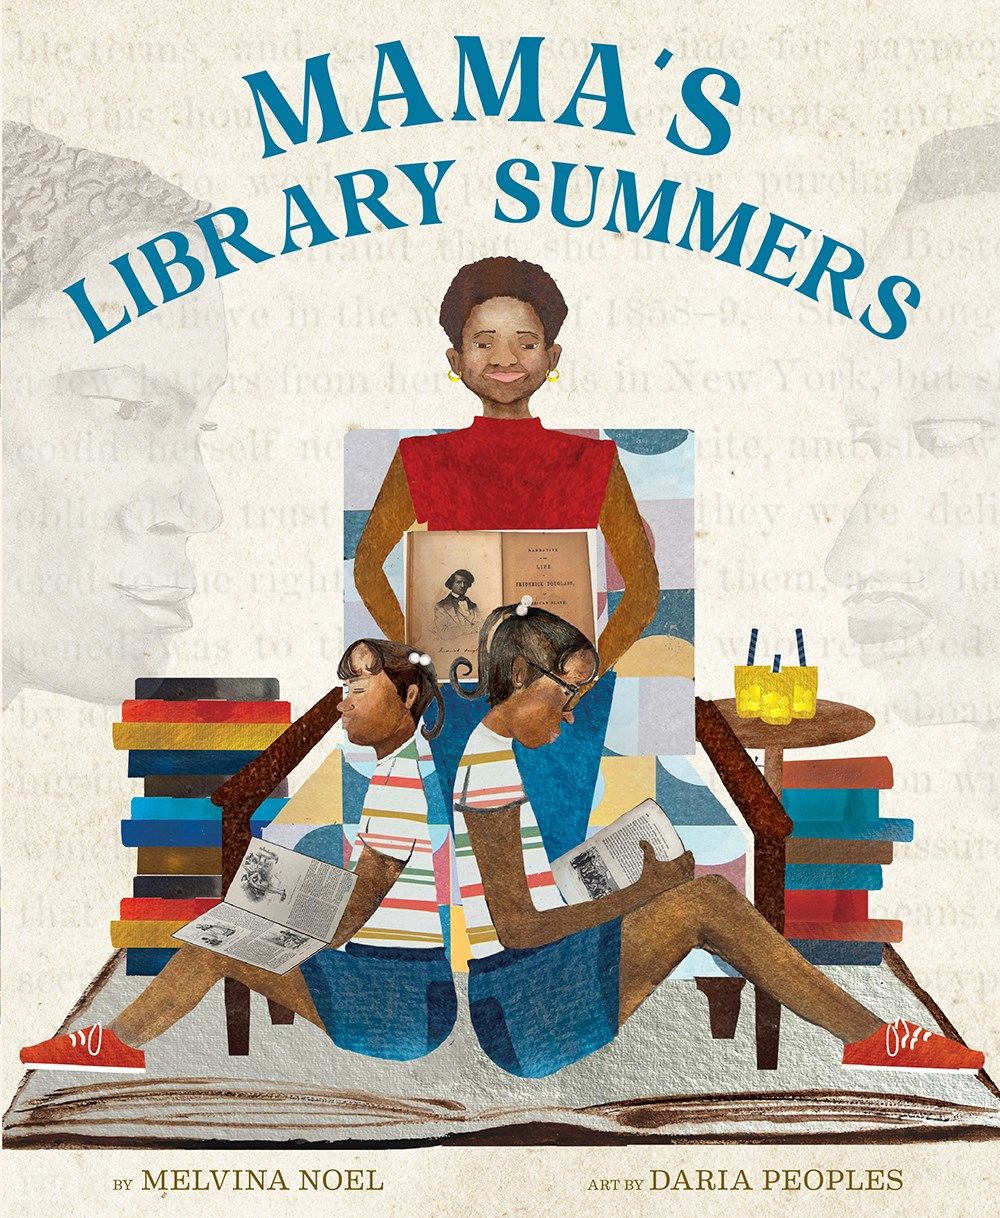 Cover of Mama's Library Summers by Melvina Noel & Daria Peoples